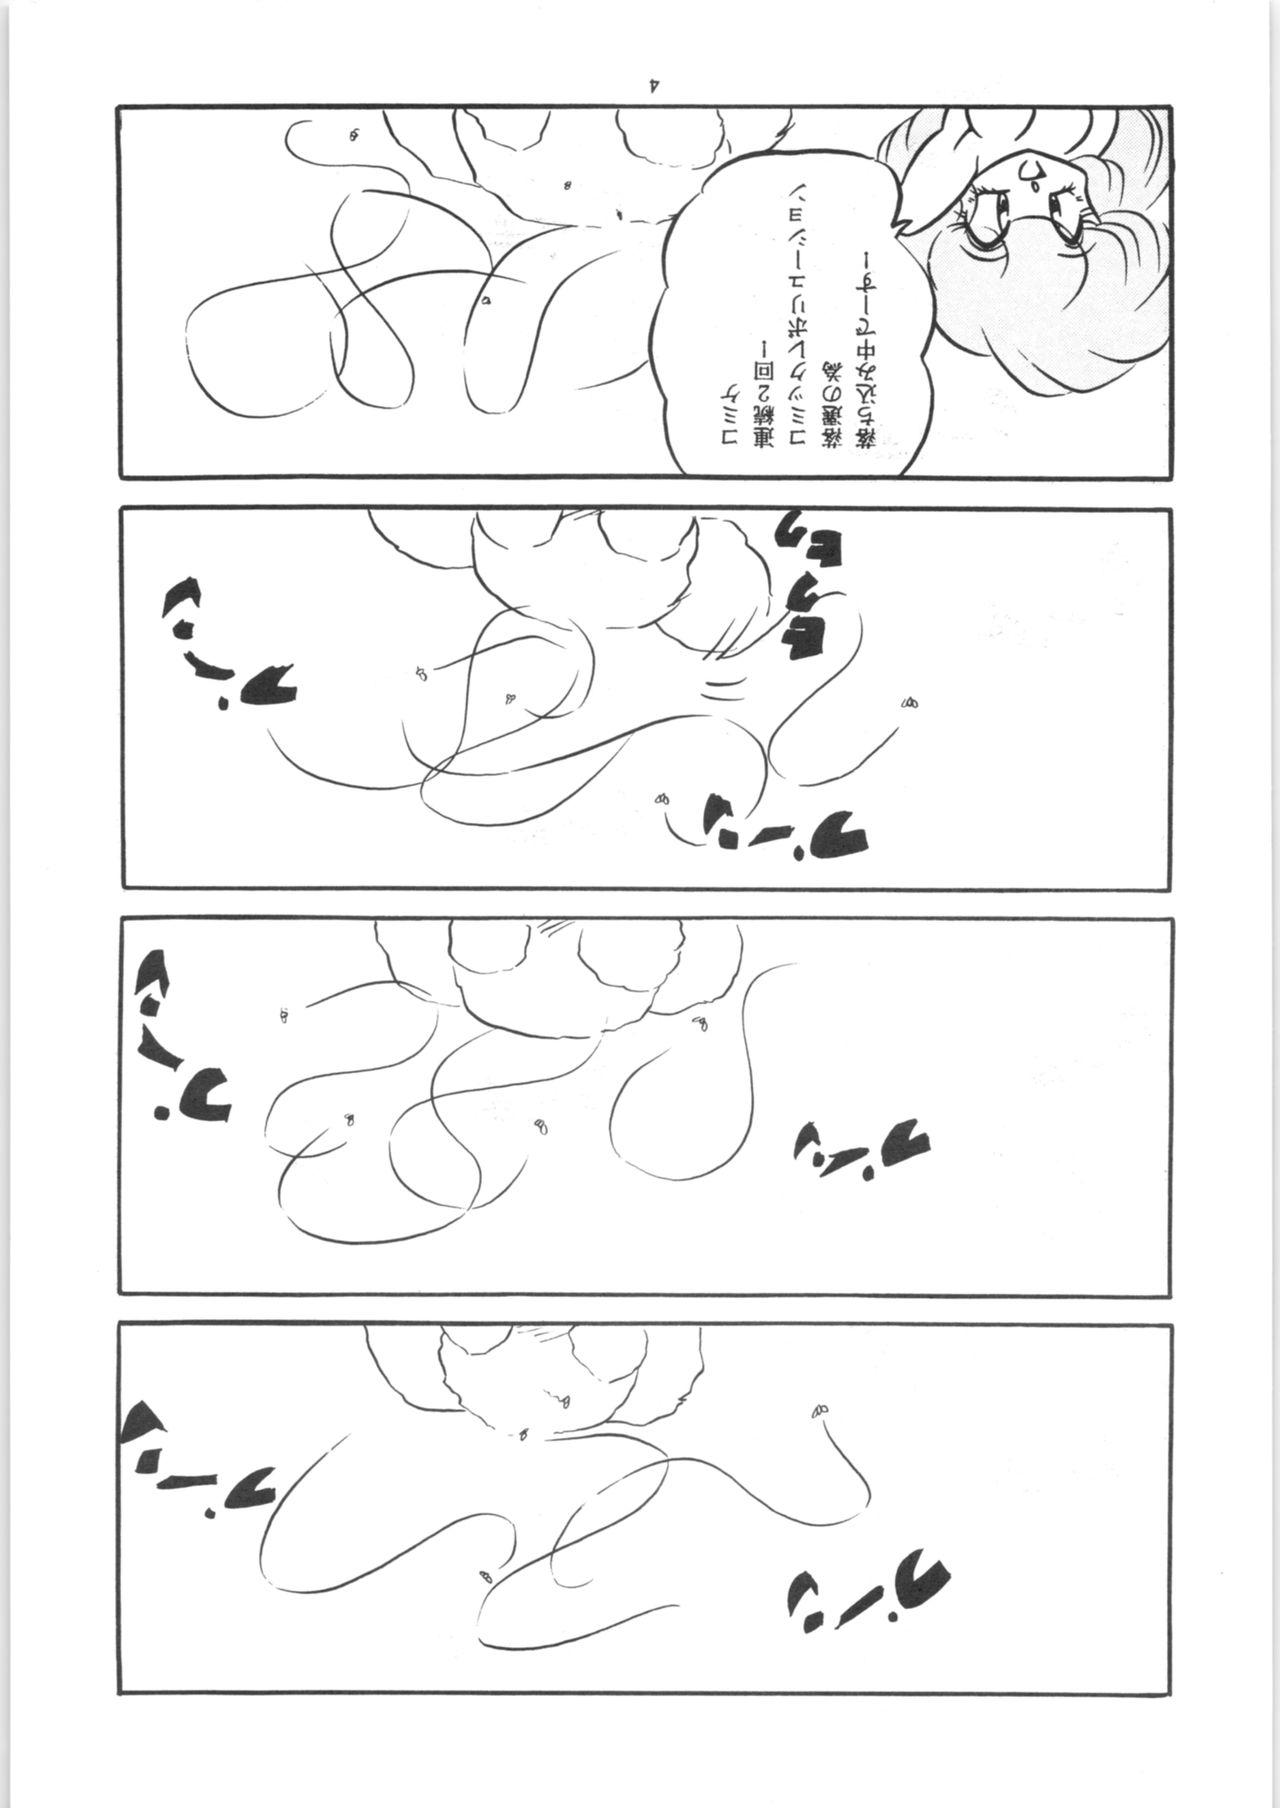 Tanned C-COMPANY SPECIAL STAGE 18 - Ranma 12 Idol project Sex - Page 4